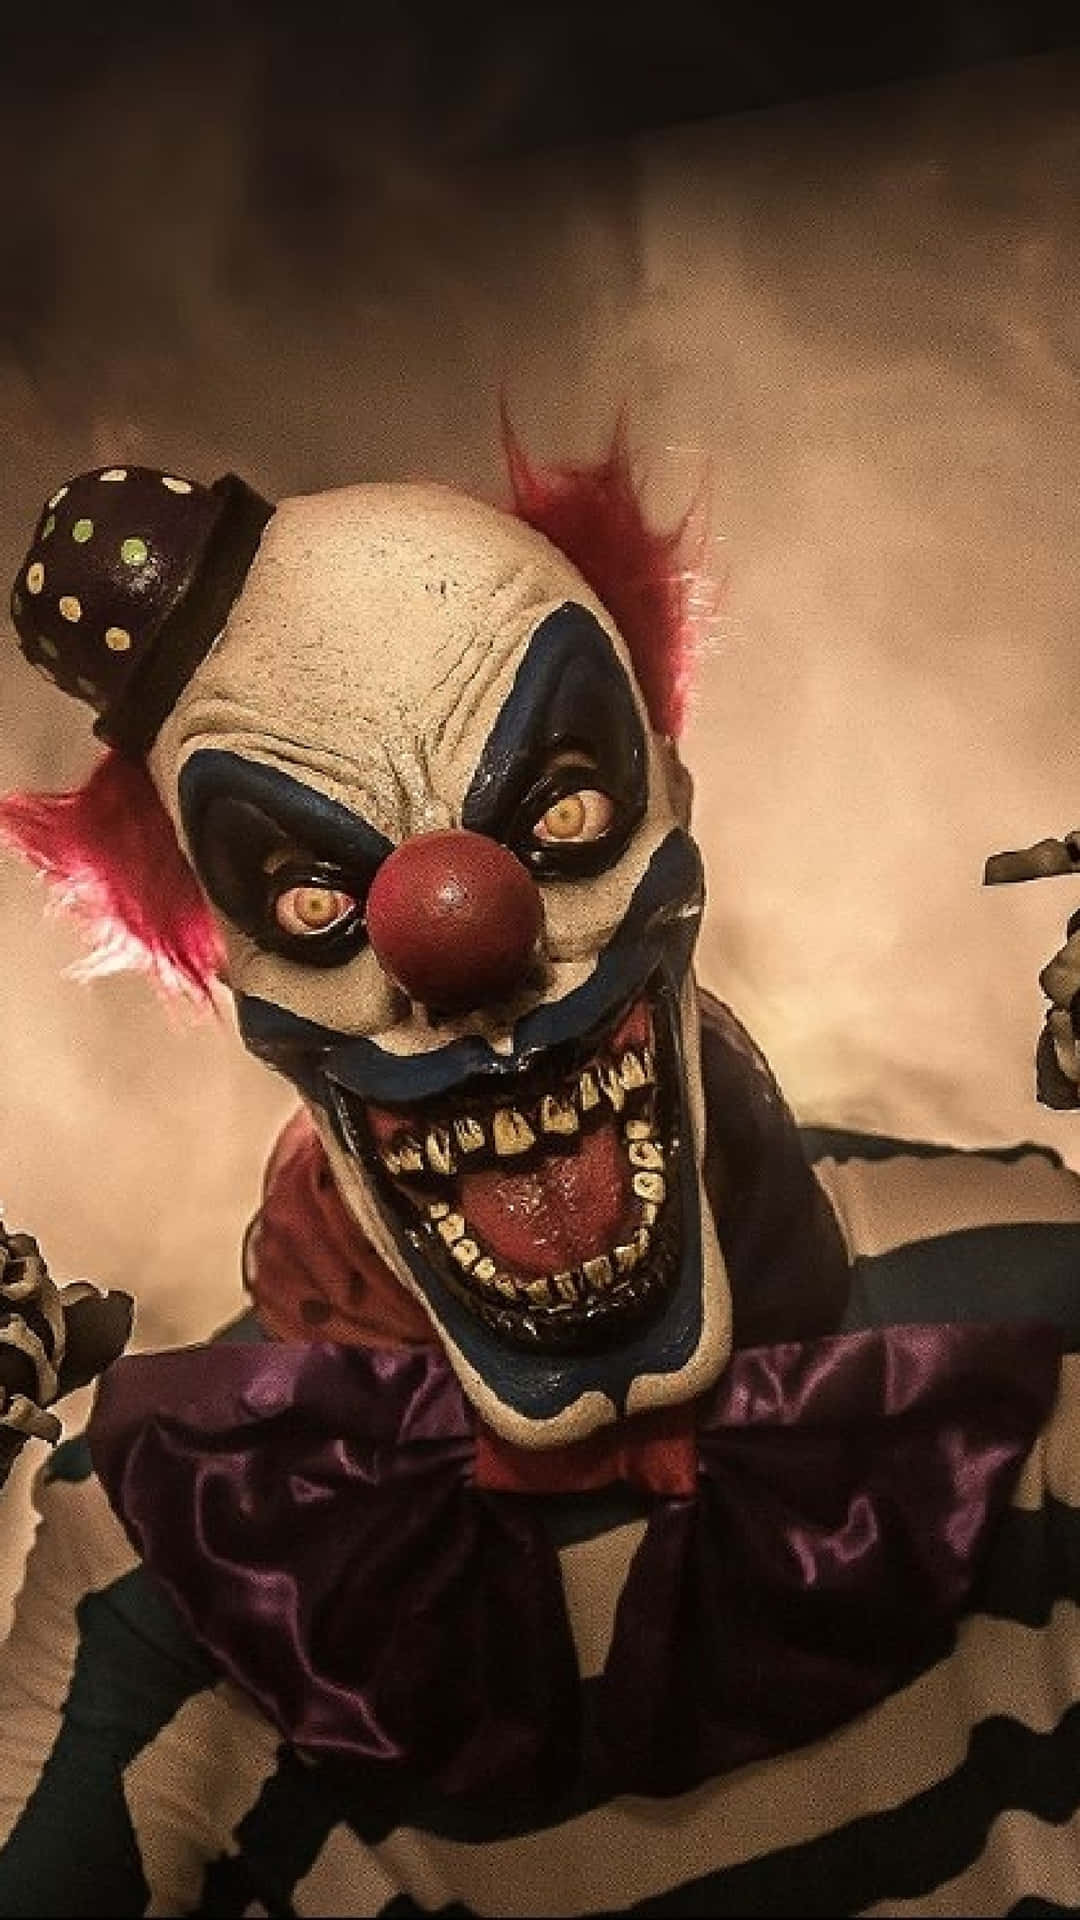 Download Big Scary Clown Mask Pictures 